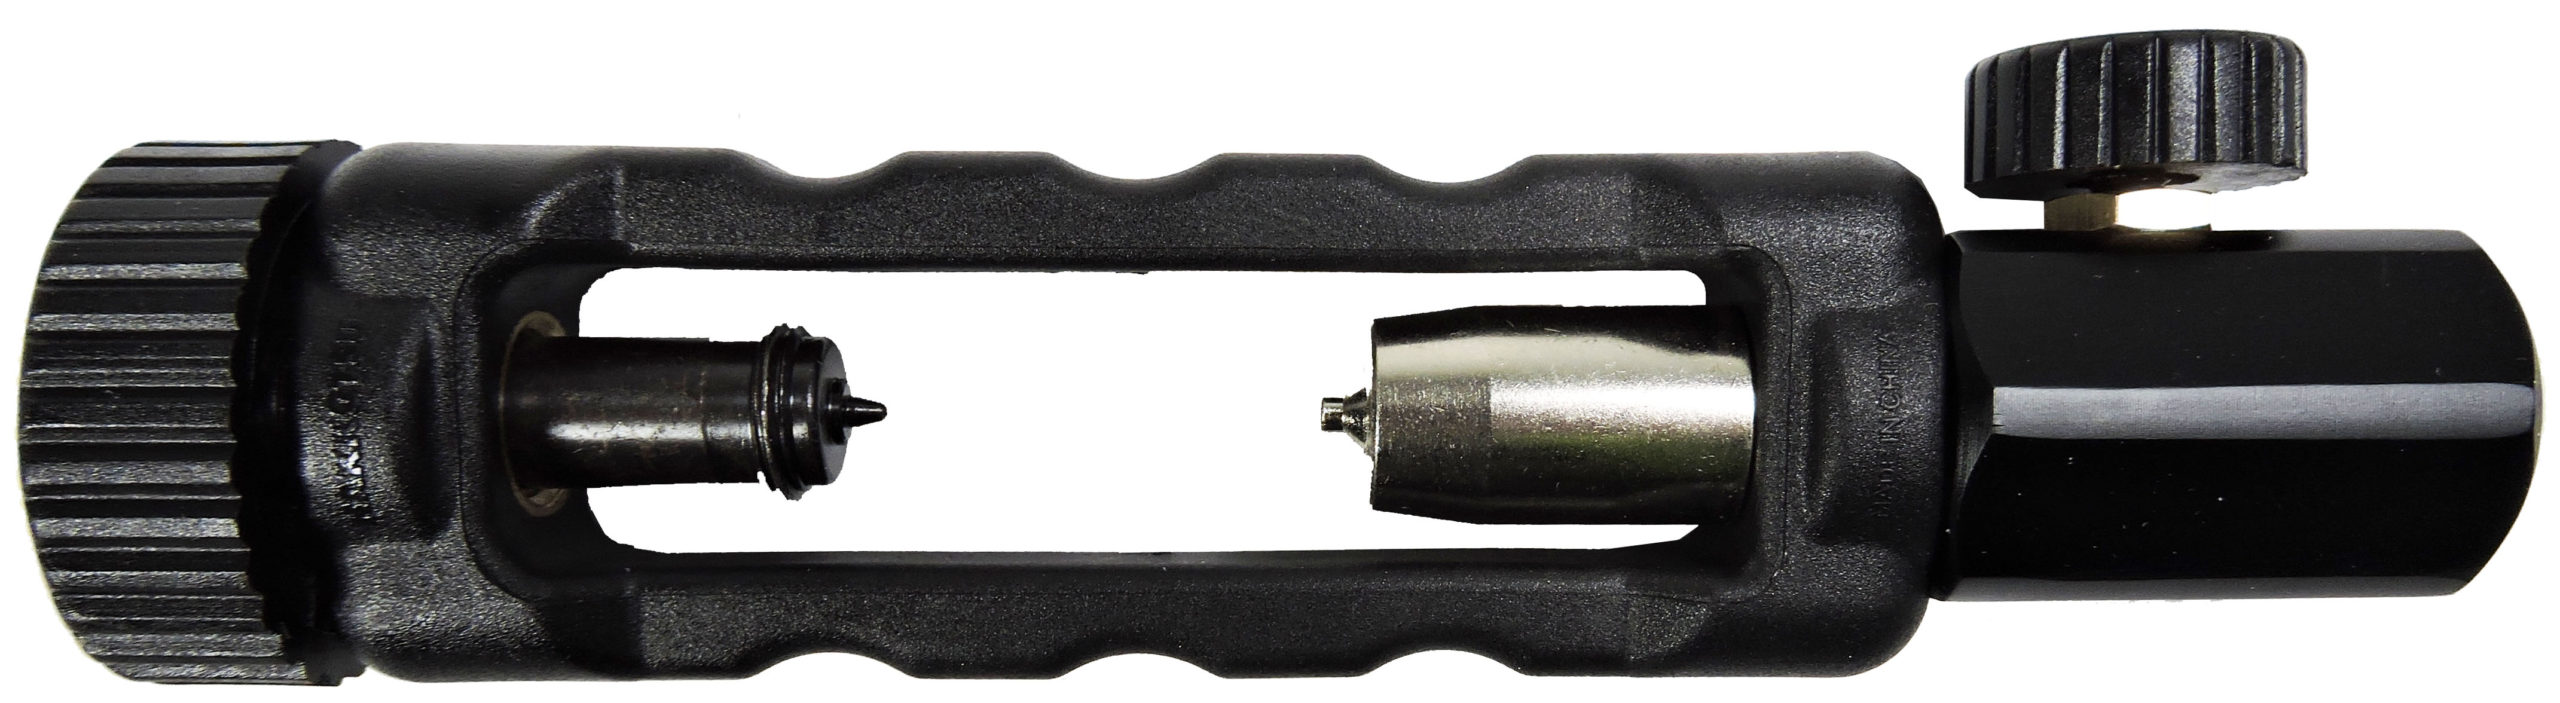 CAM MK1 cartridge charger